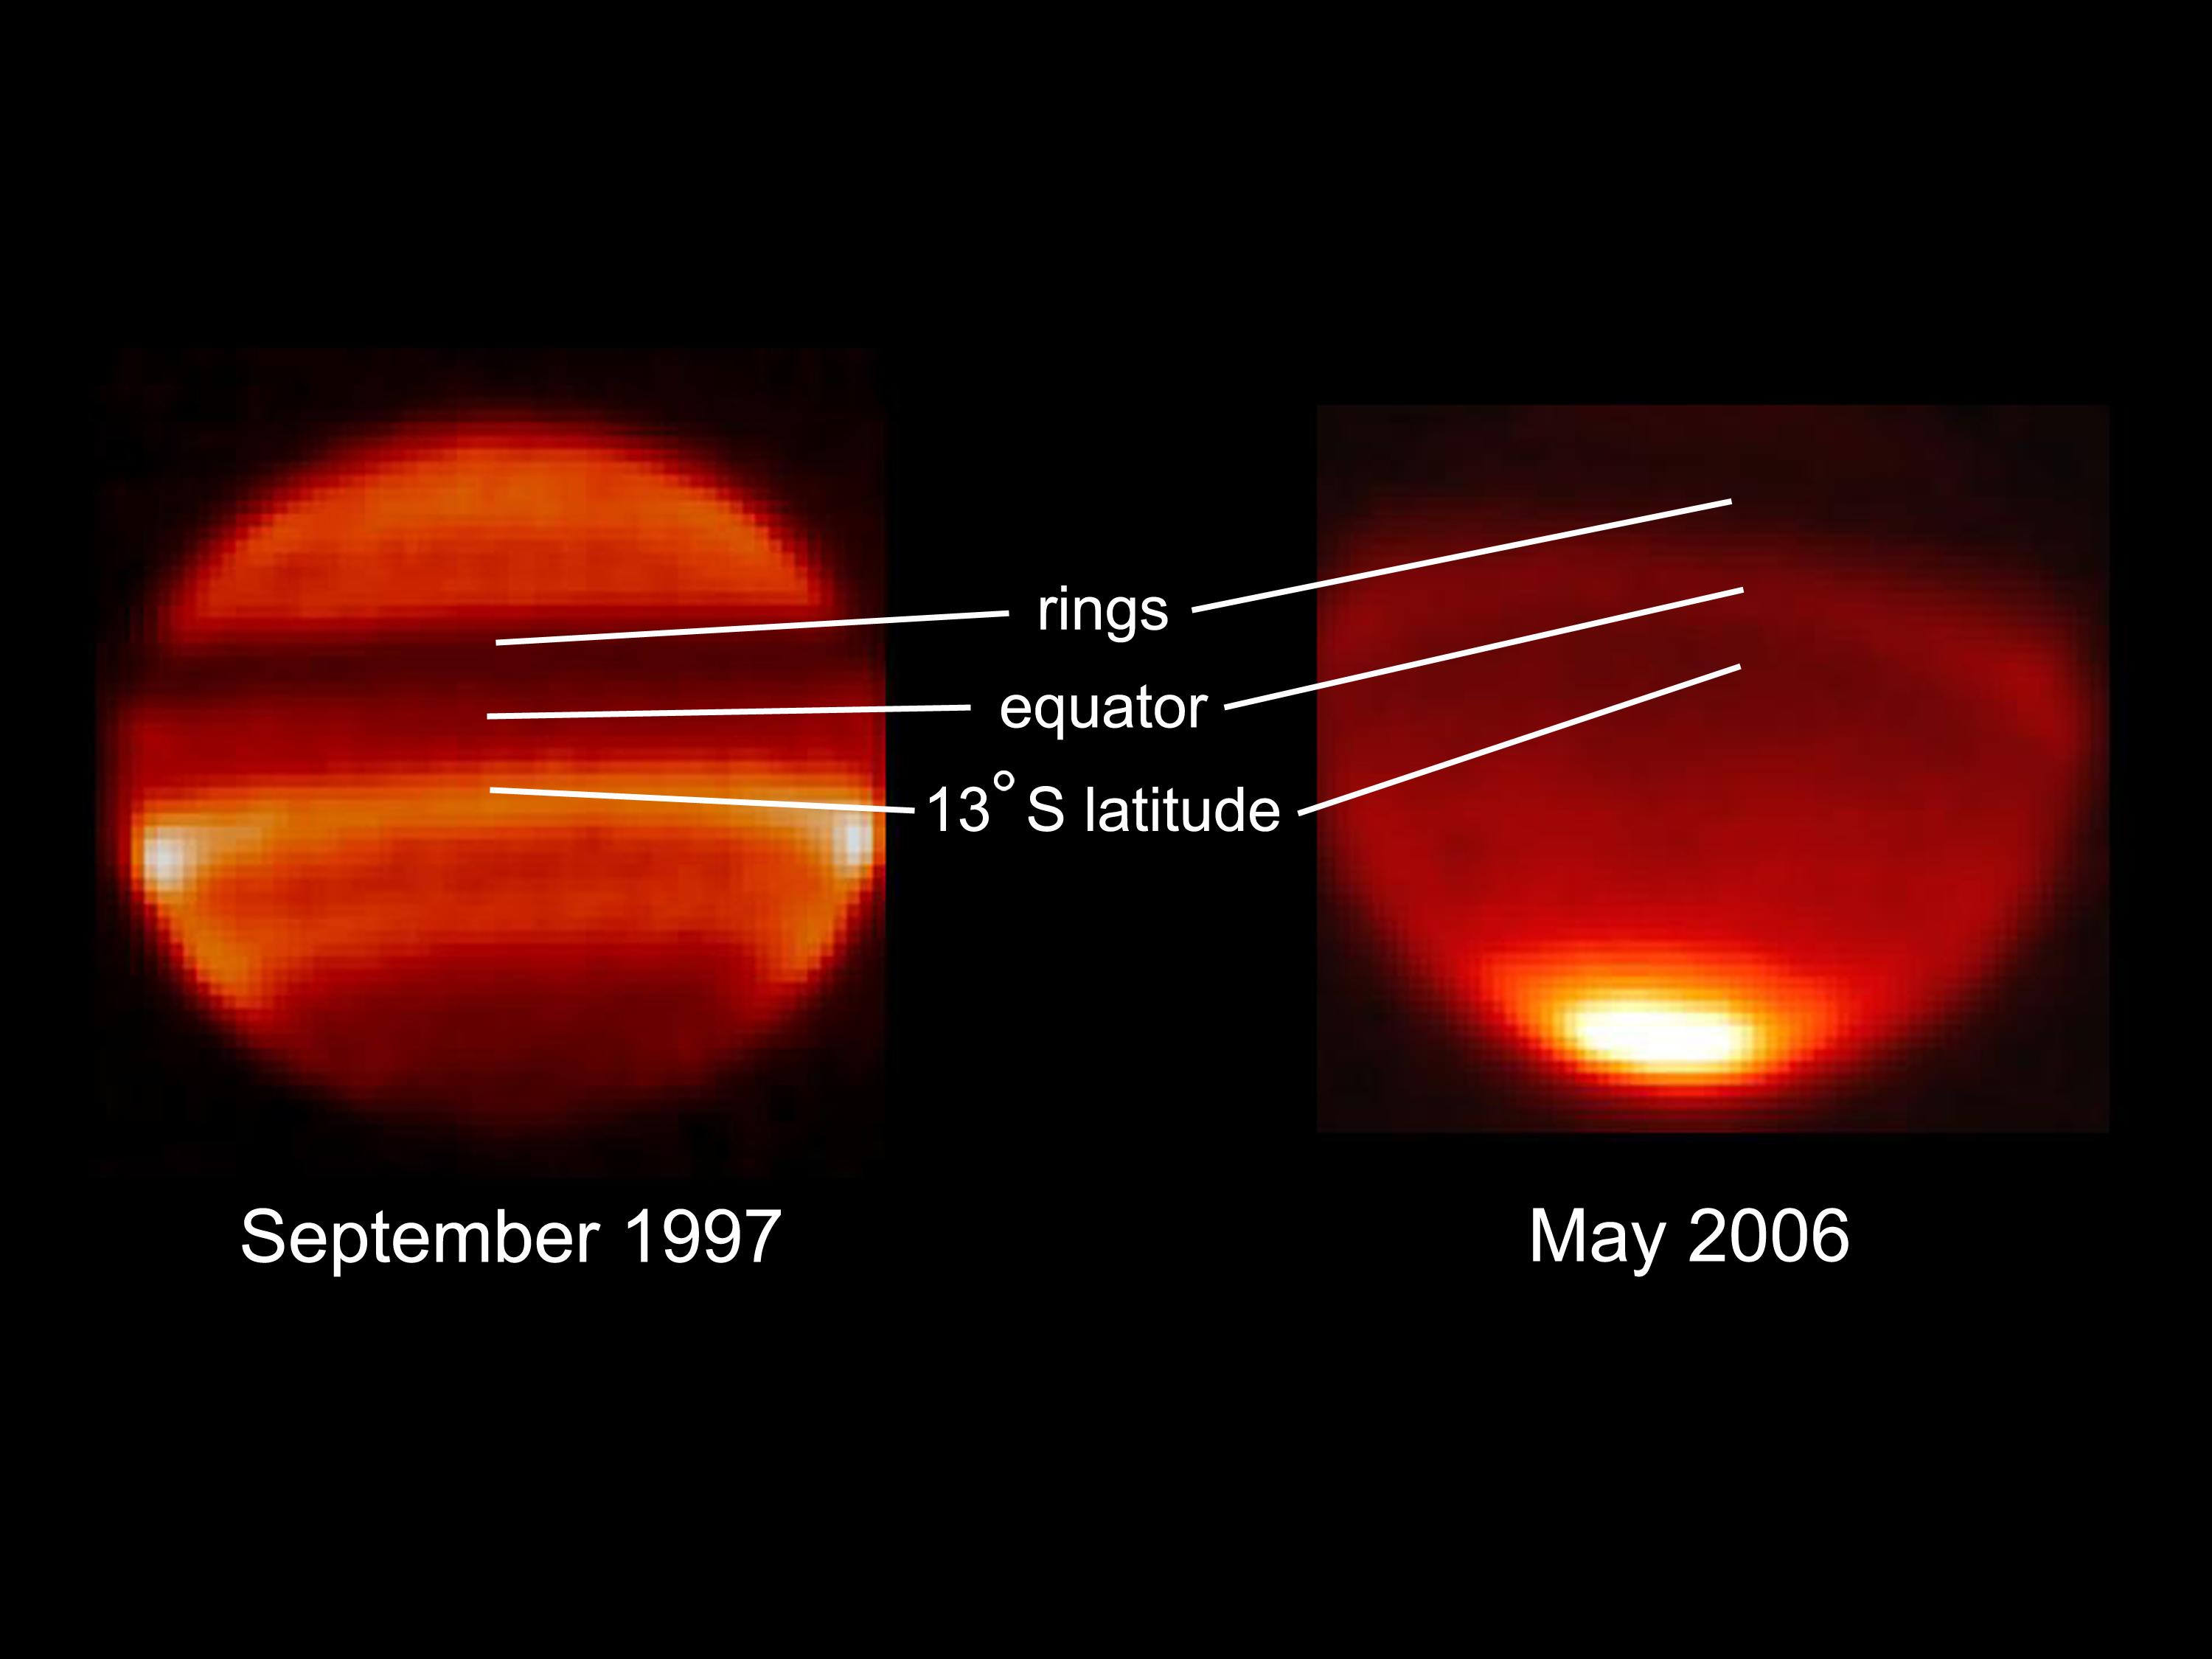 Two different phases of temperature on Saturn